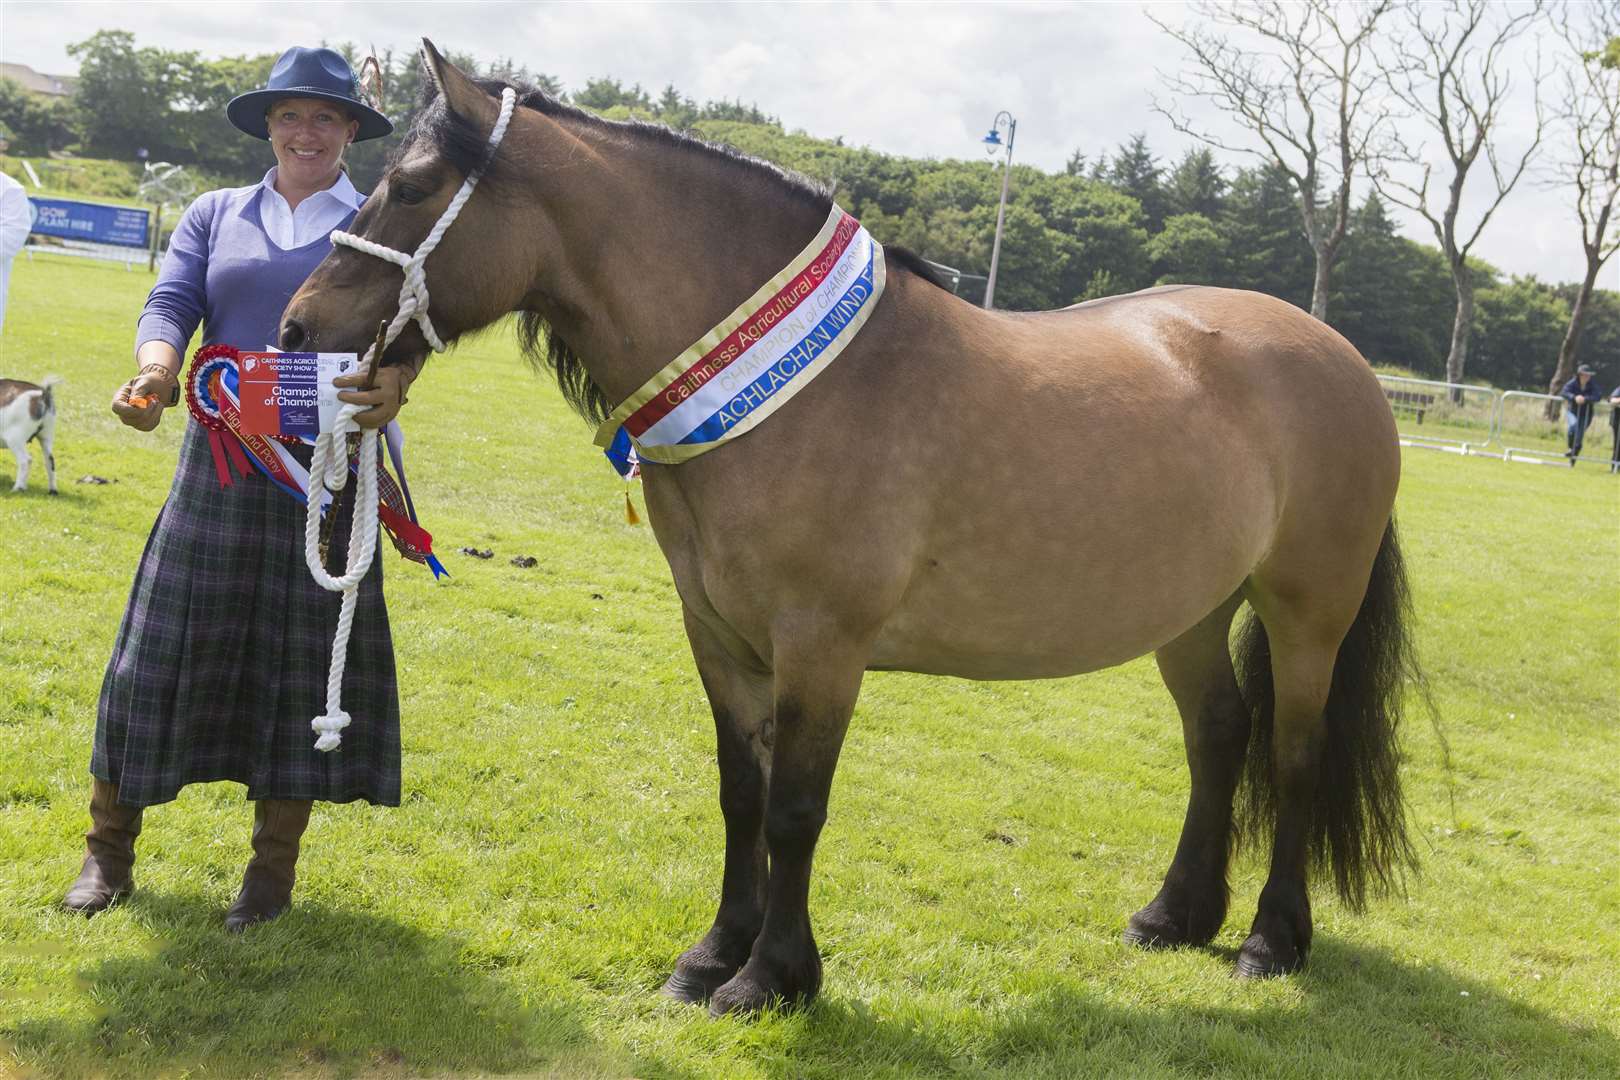 Ashleigh Campbell with the five-year-old mare Grace of Alltnacailleach that won the champion of champion, supreme horse champion and Highland pony champion titles. The pony is owned by her sister Amanda McLennan, who runs the Kirkjuvagr Stud at Garth Farm, St Ola, Orkney. Picture: Robert MacDonald / Northern Studios